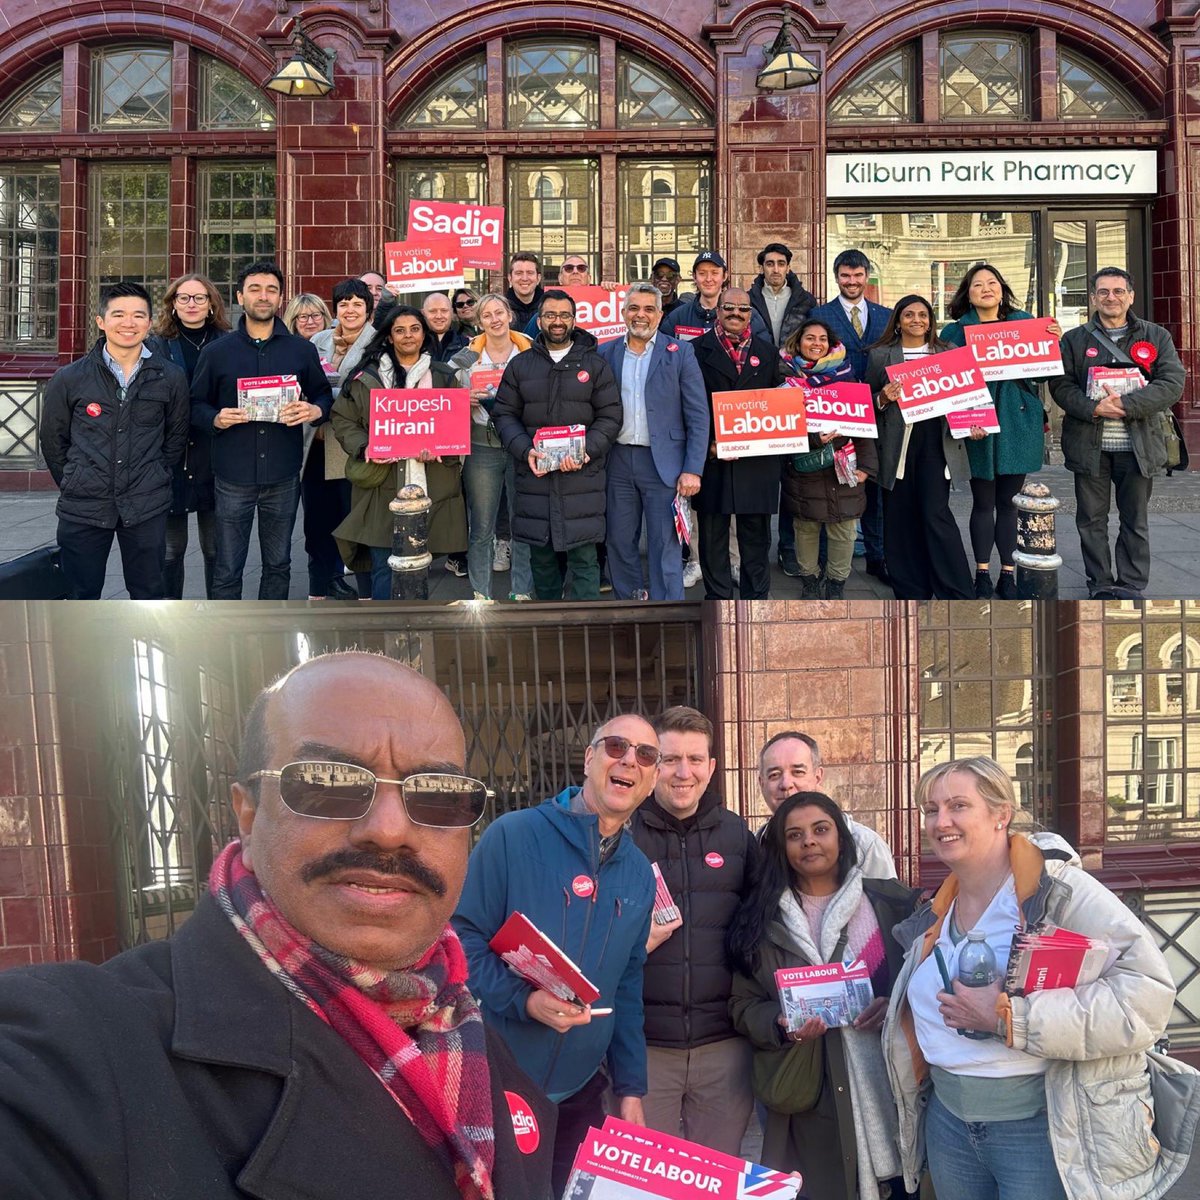 .@BrentLabour out in full force tonight for @SadiqKhan in #Kilburn Cast your 3 #Vote for @LondonLabour on 2 May 🌹🌹🌹